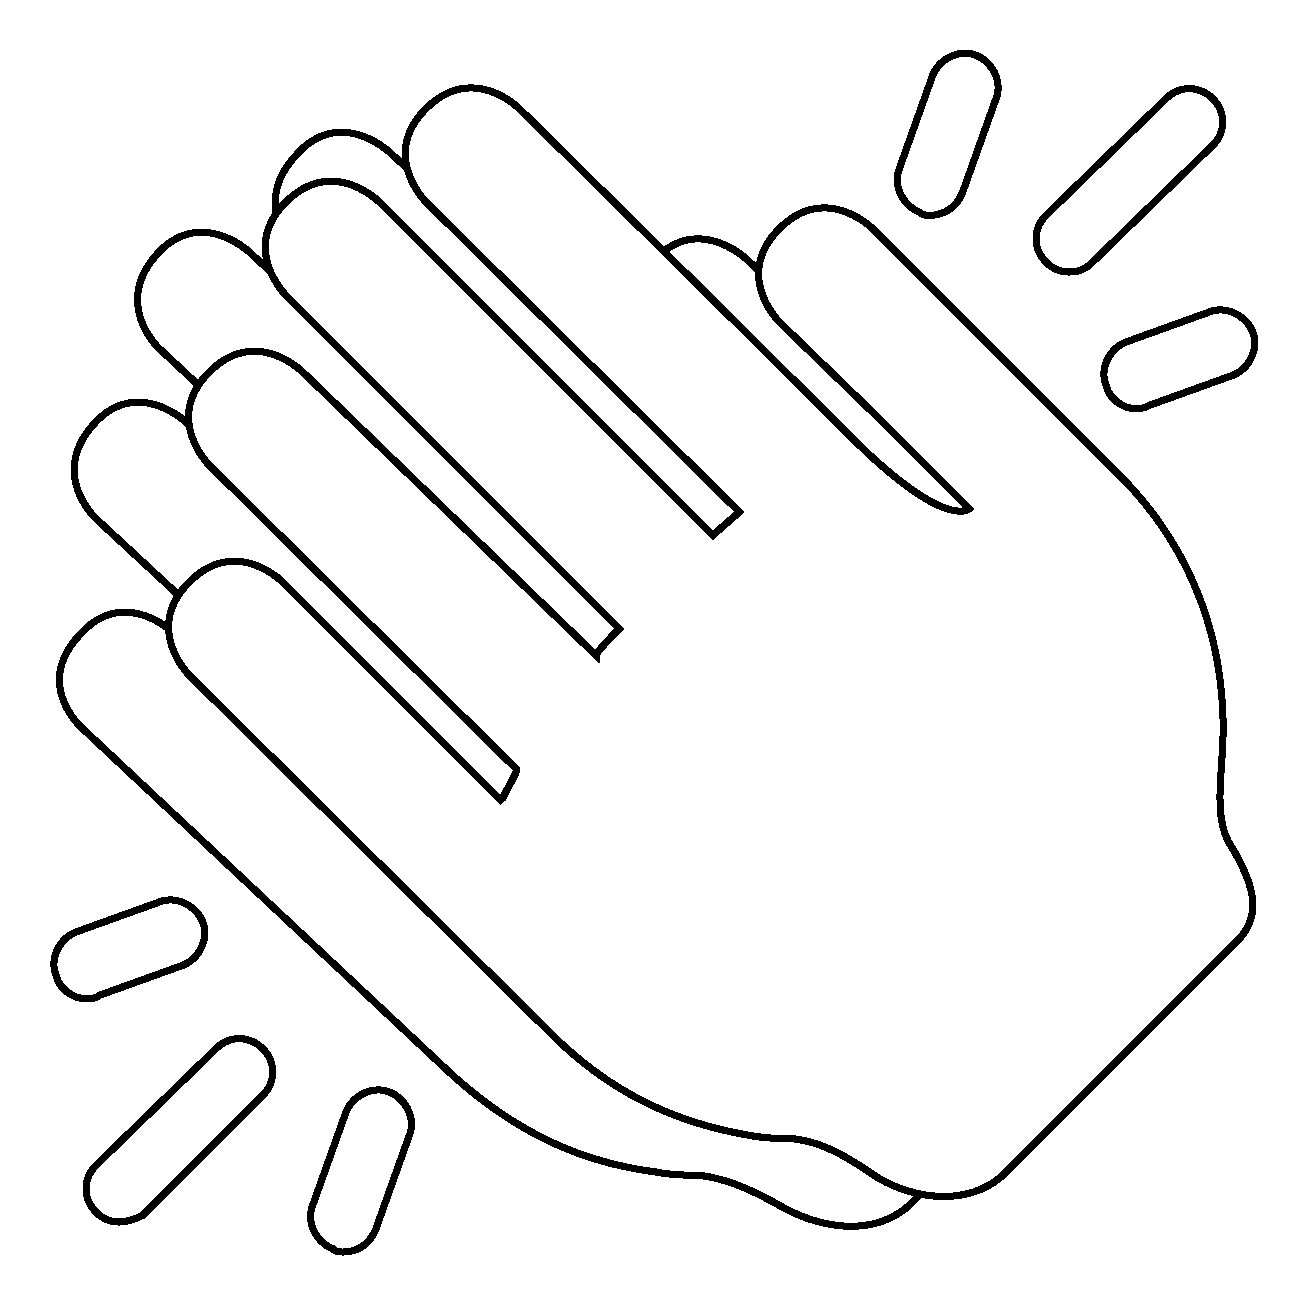 Clapping Hands Emoji Coloring Page Colouringpages | The Best Porn Website